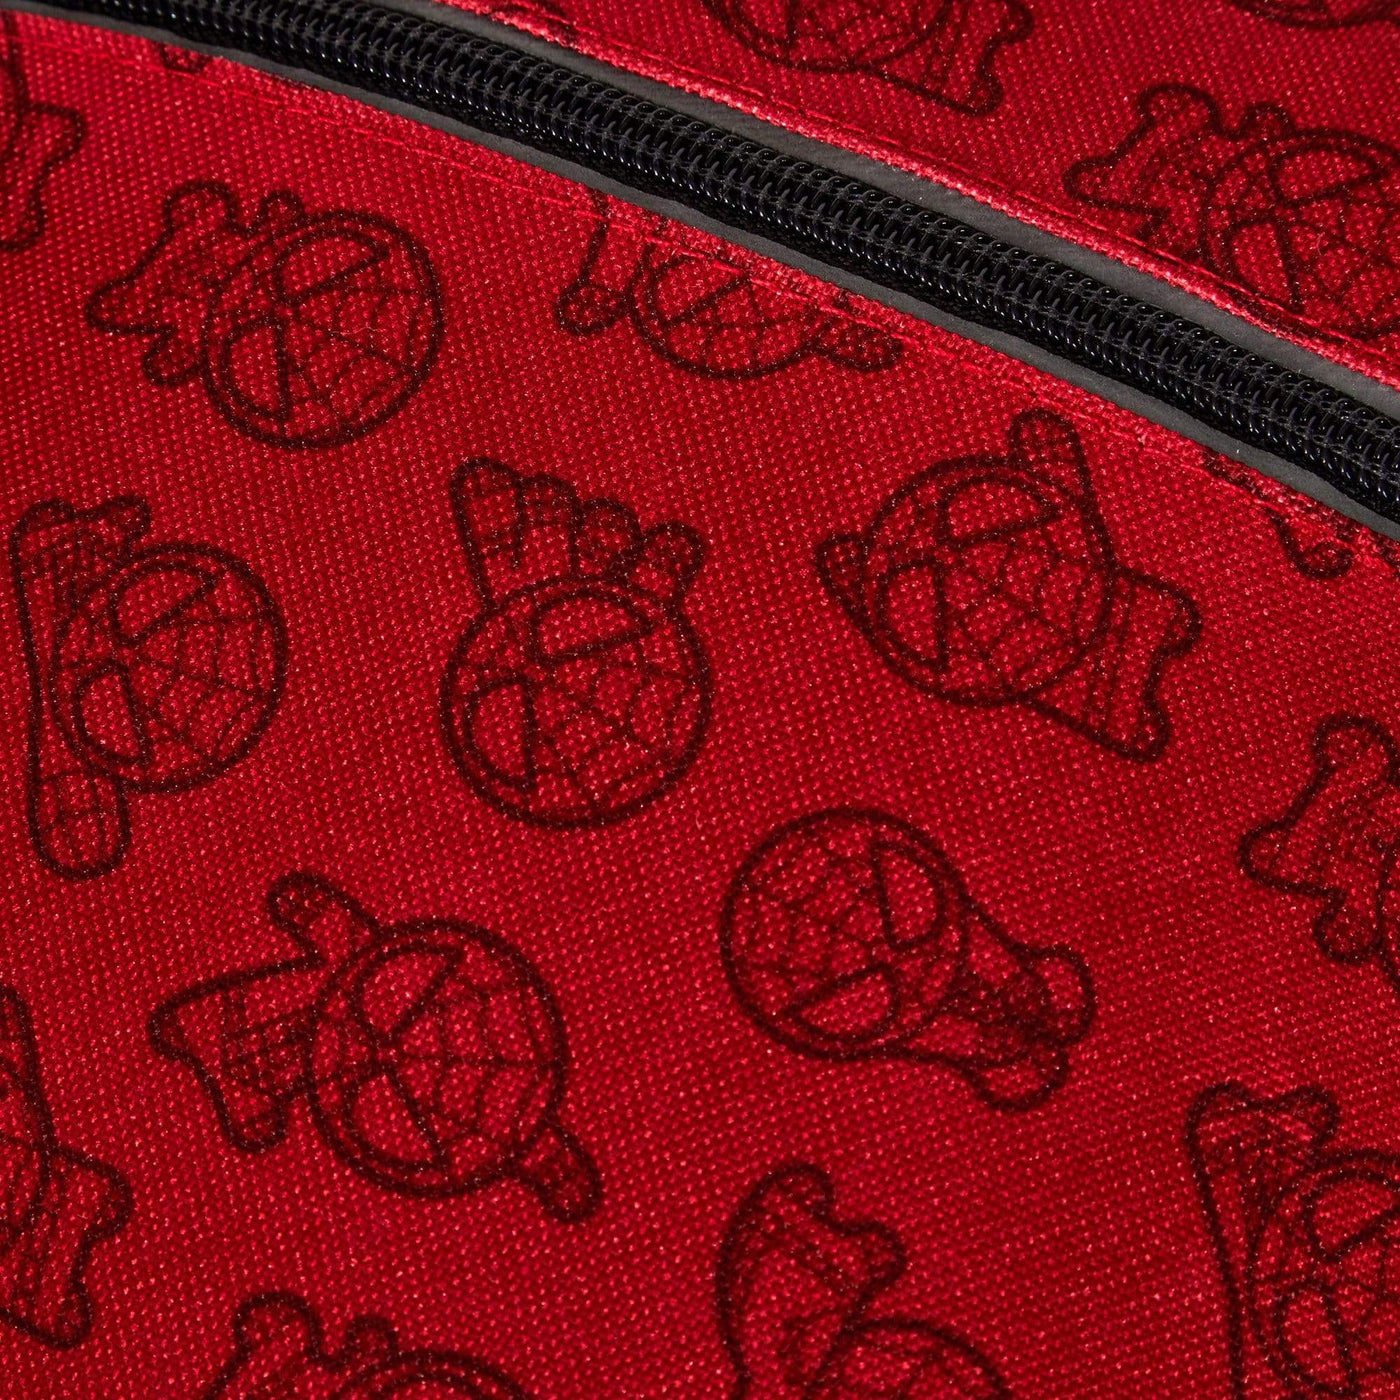 close up of Spider-Man print on red Spider-Man backpack